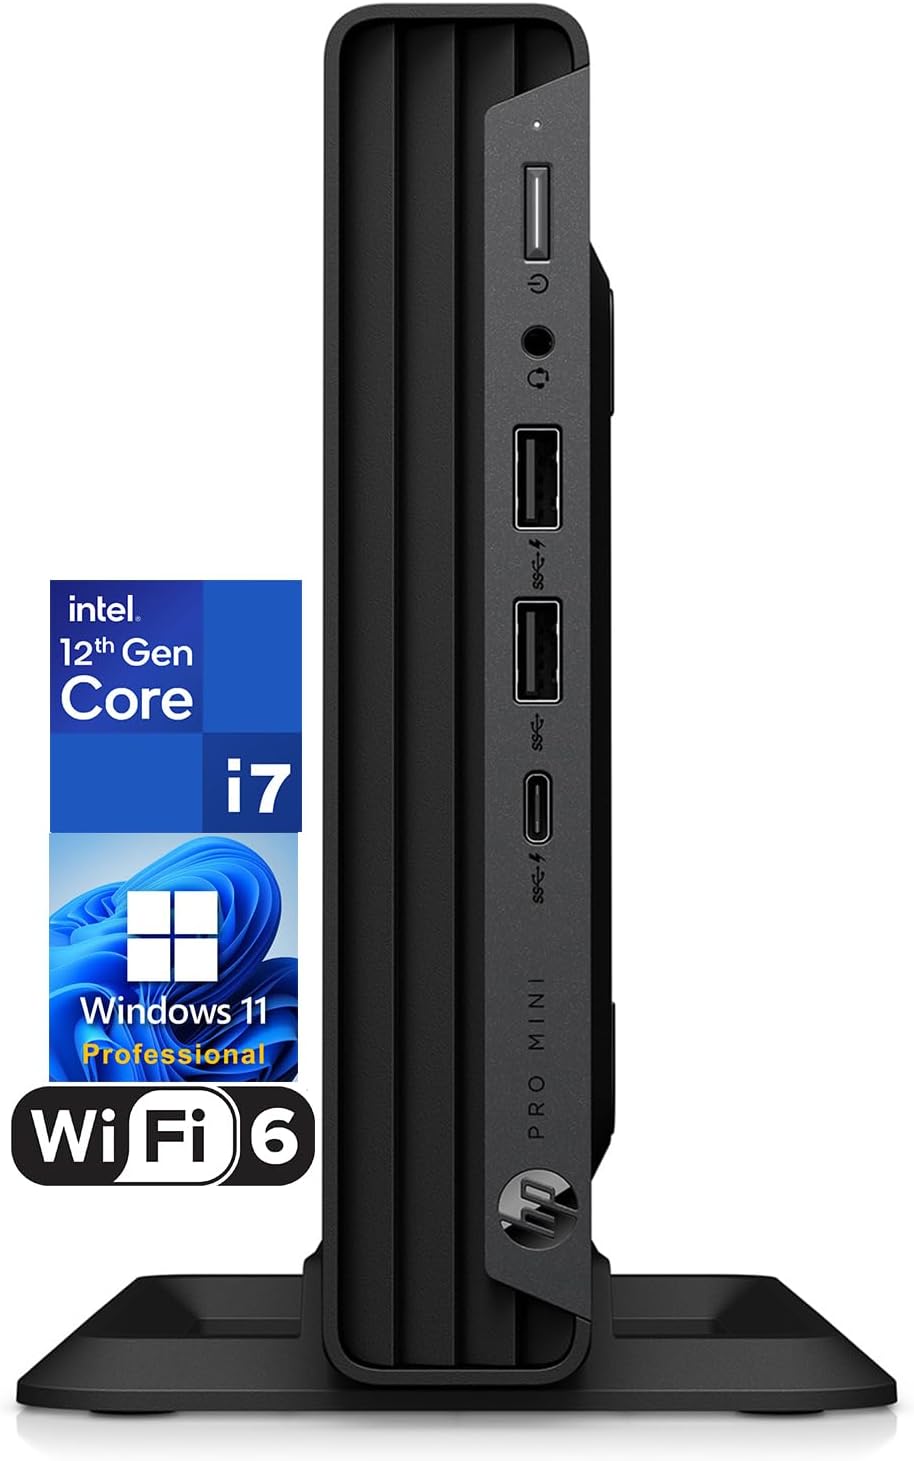 HP ProDesk 400 G9 Mini PC Business Desktop Computer, Intel 12-Core i7-12700T up to 4.7GHz, 16GB DDR4 RAM, 1TB PCIe SSD, WiFi 6, Bluetooth 5.2, Keyboard and Mouse, Windows 11 Pro